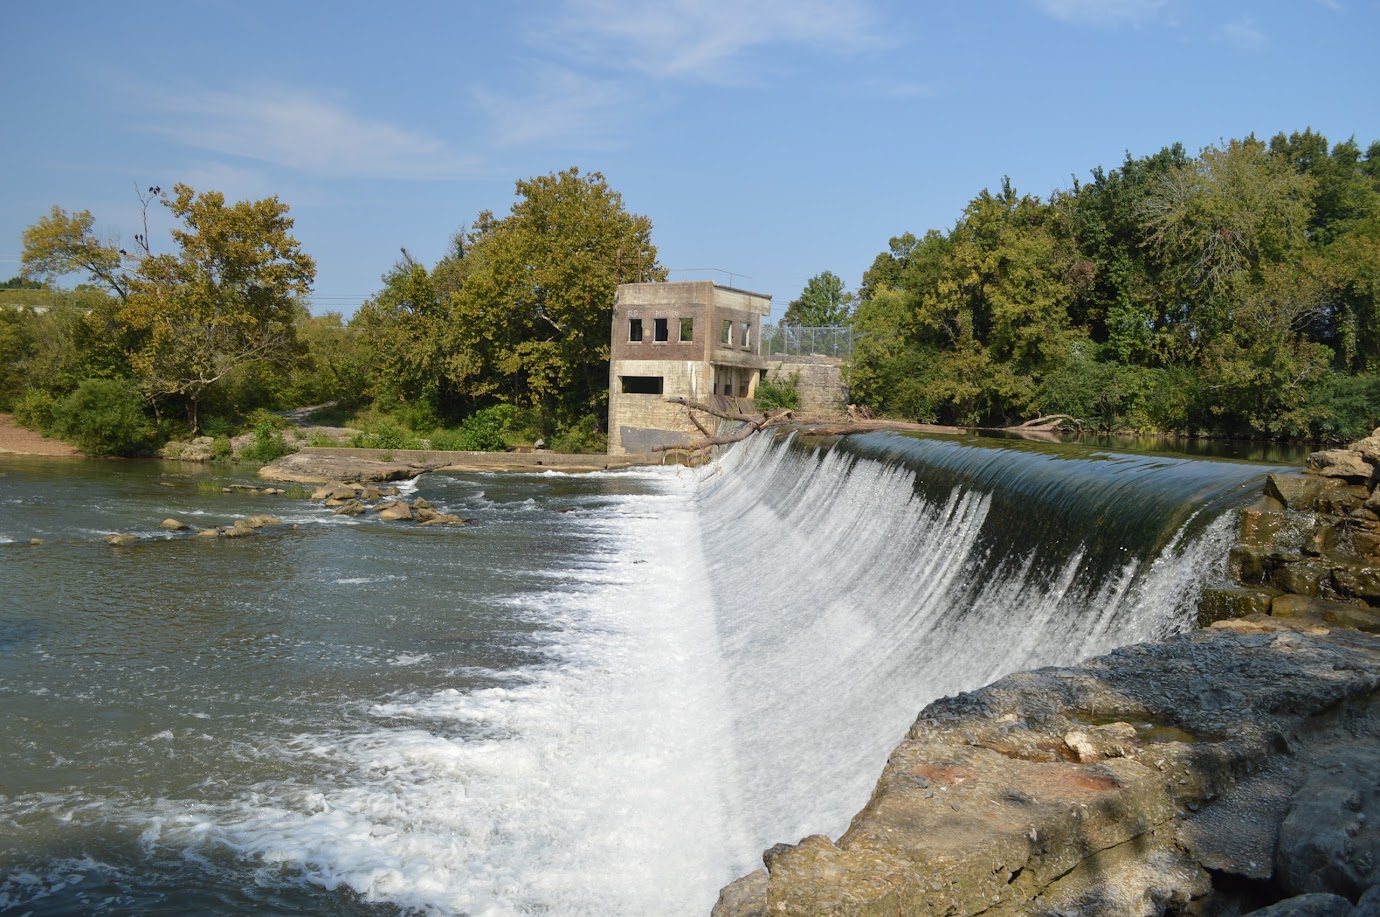 Walter Hill Hydroelectric Station